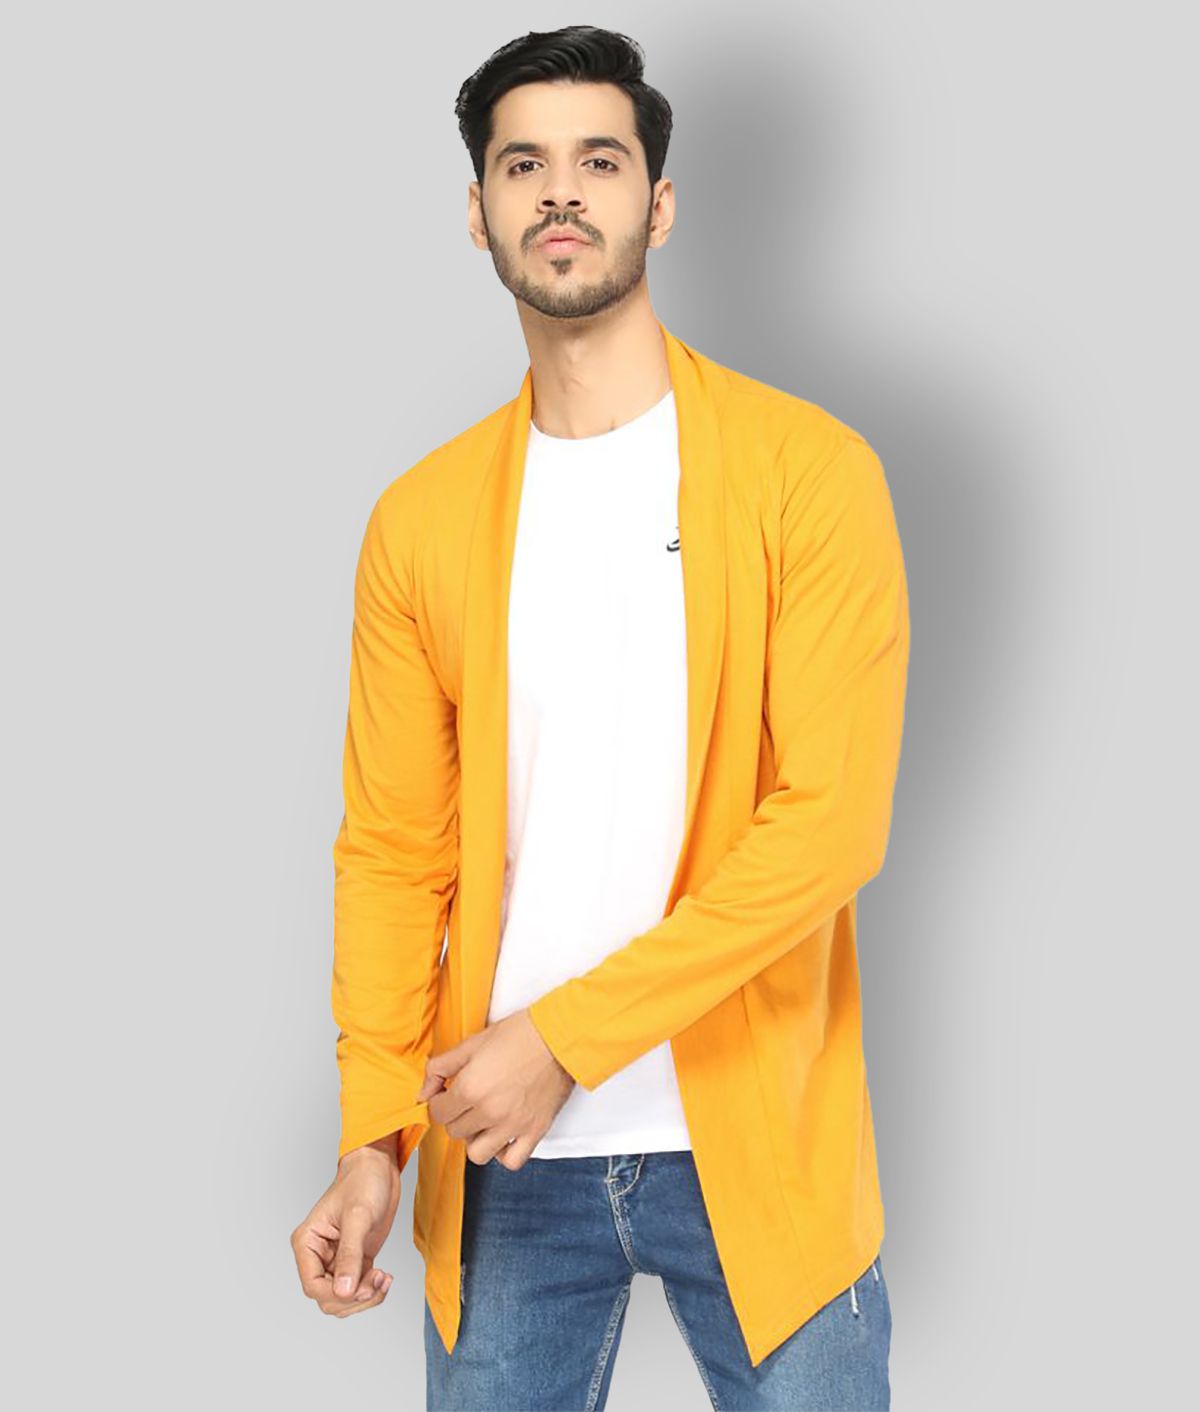     			Glito - Yellow Cotton Men's Cardigans Sweater ( Pack of 1 )